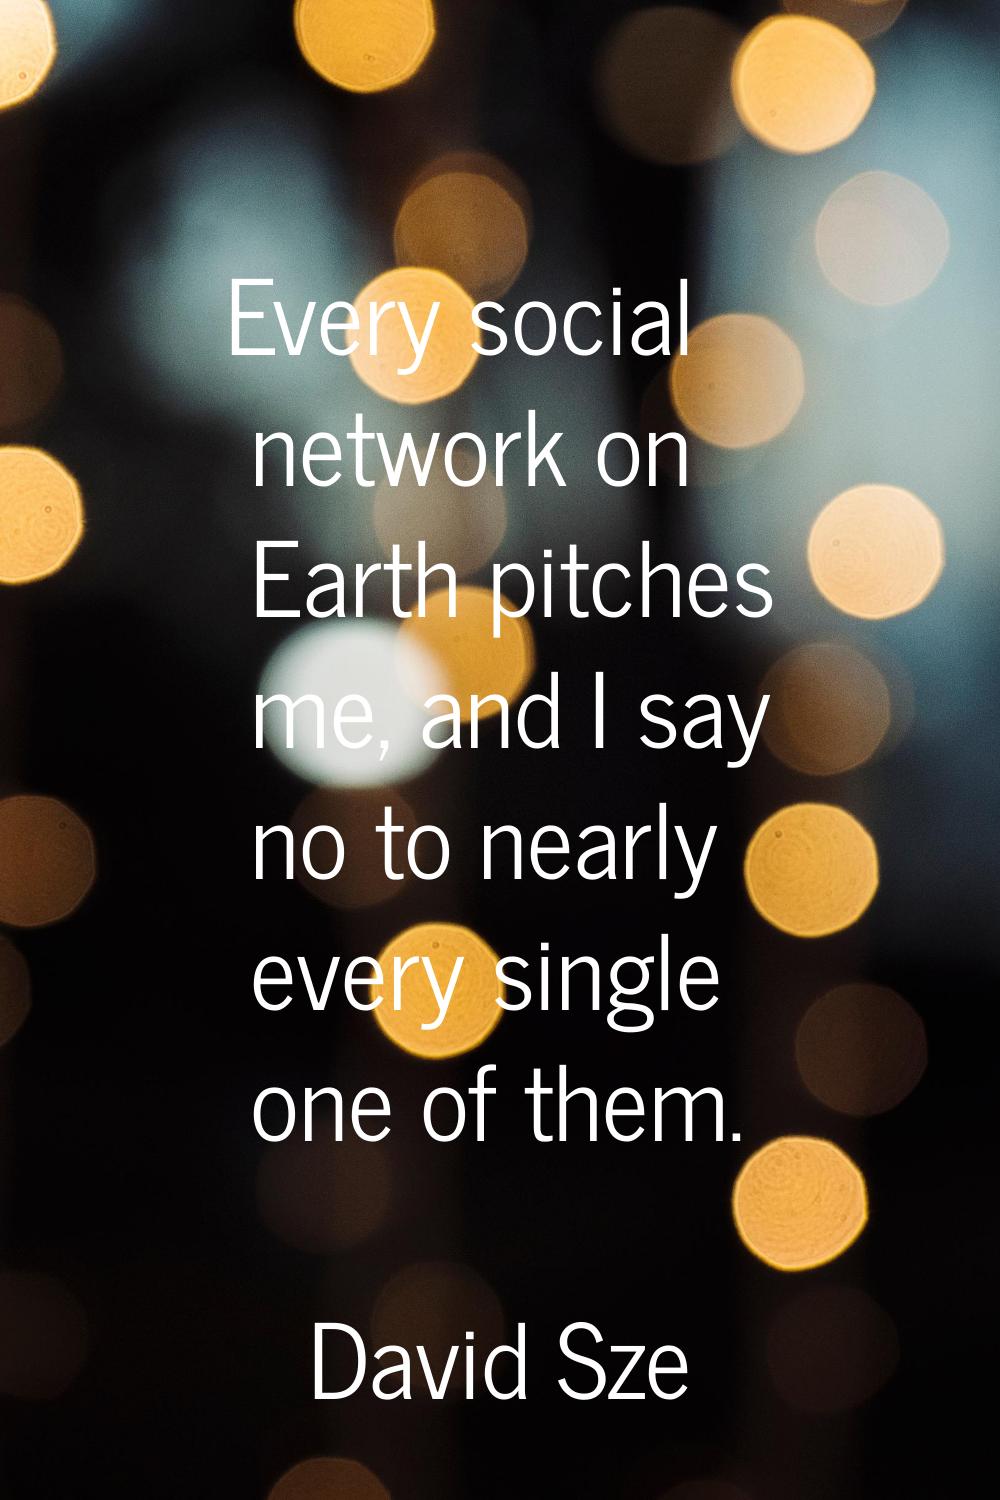 Every social network on Earth pitches me, and I say no to nearly every single one of them.